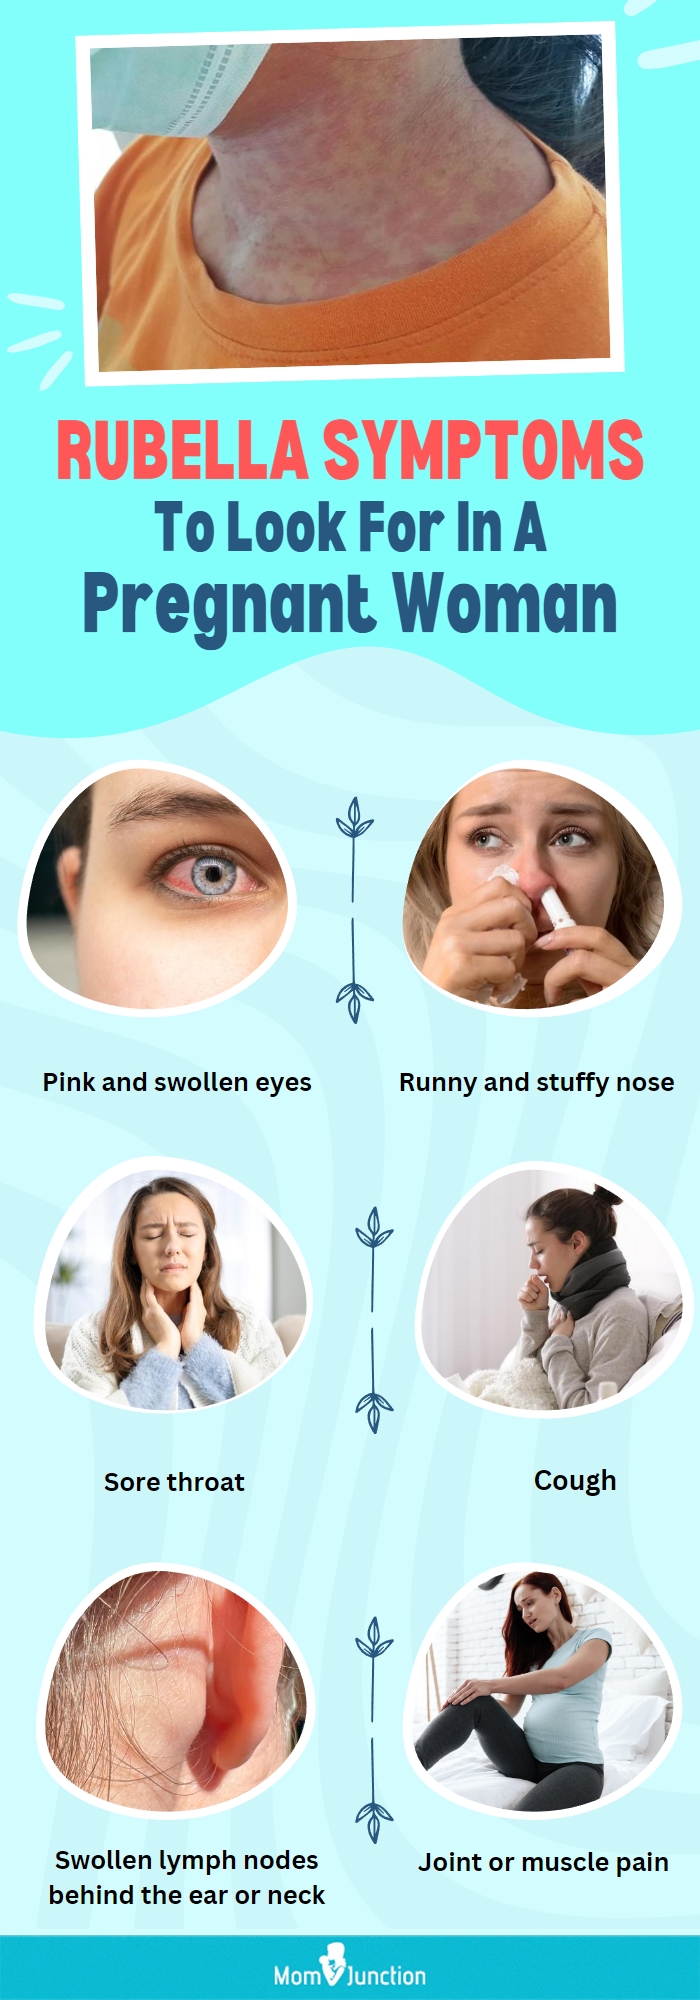 rubella symptoms to look for in a pregnant woman (infographic)